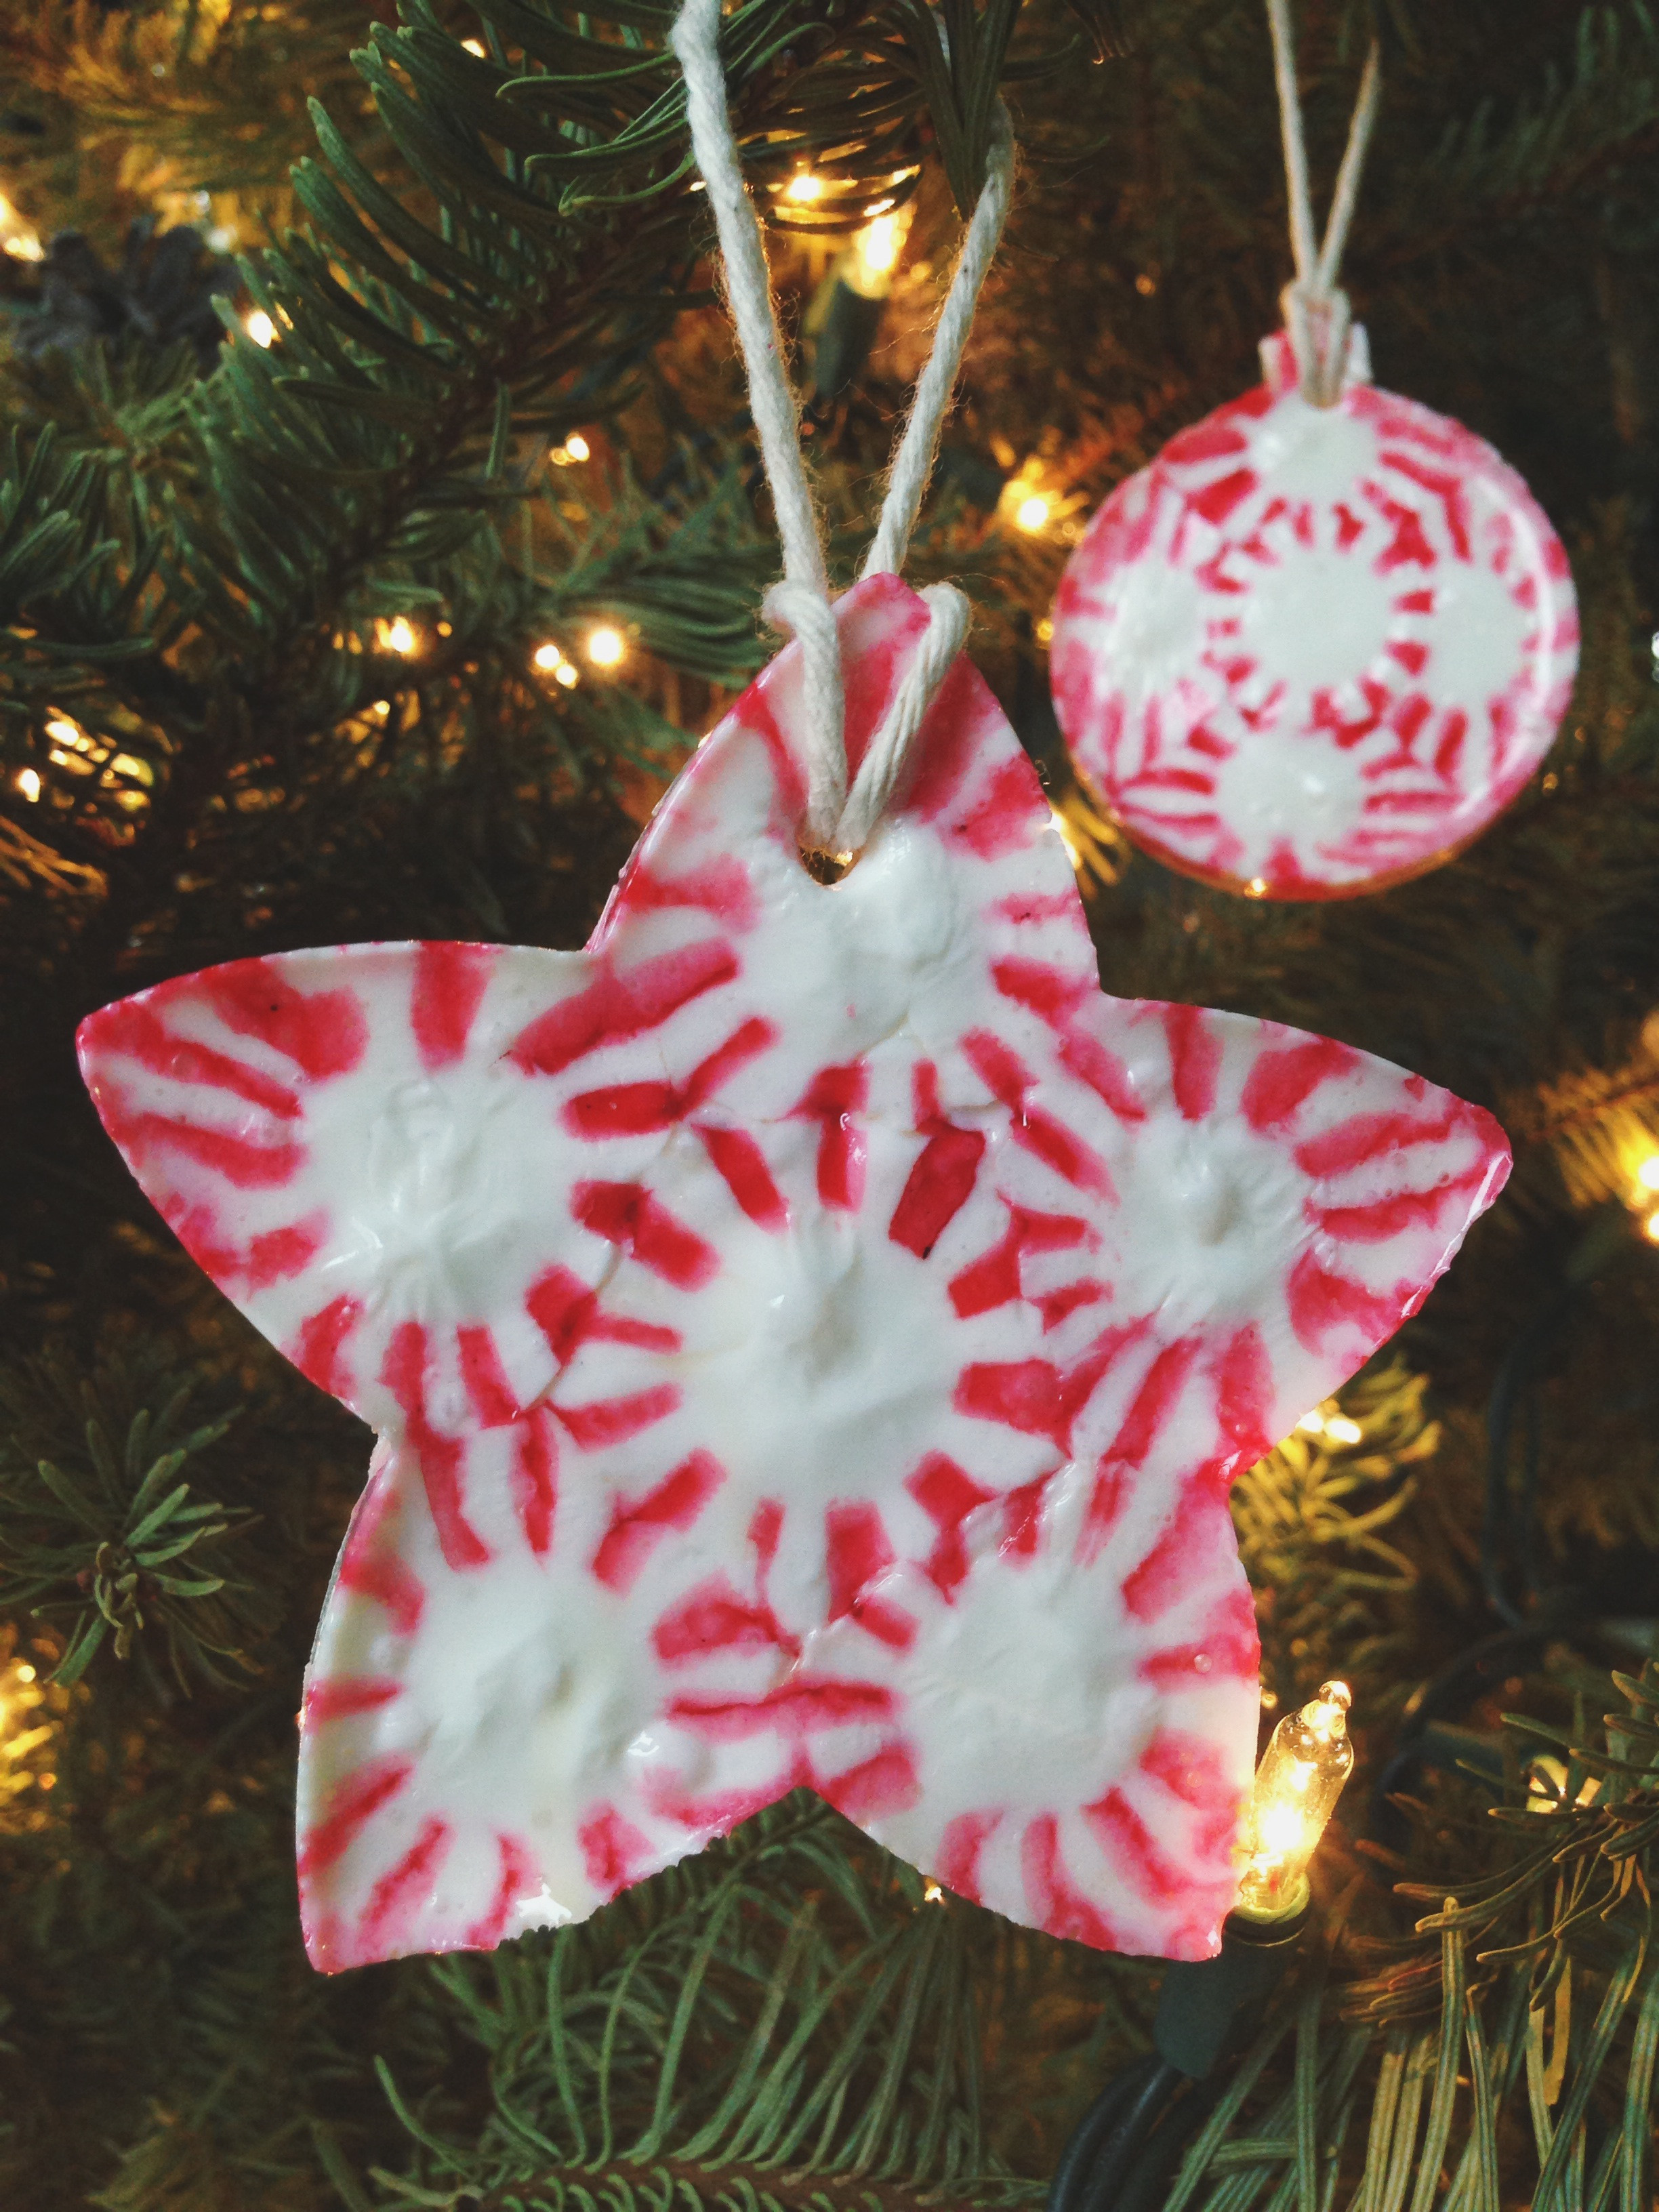 Peppermint Candy Christmas Decorations
 25 Beautiful Handmade Ornaments